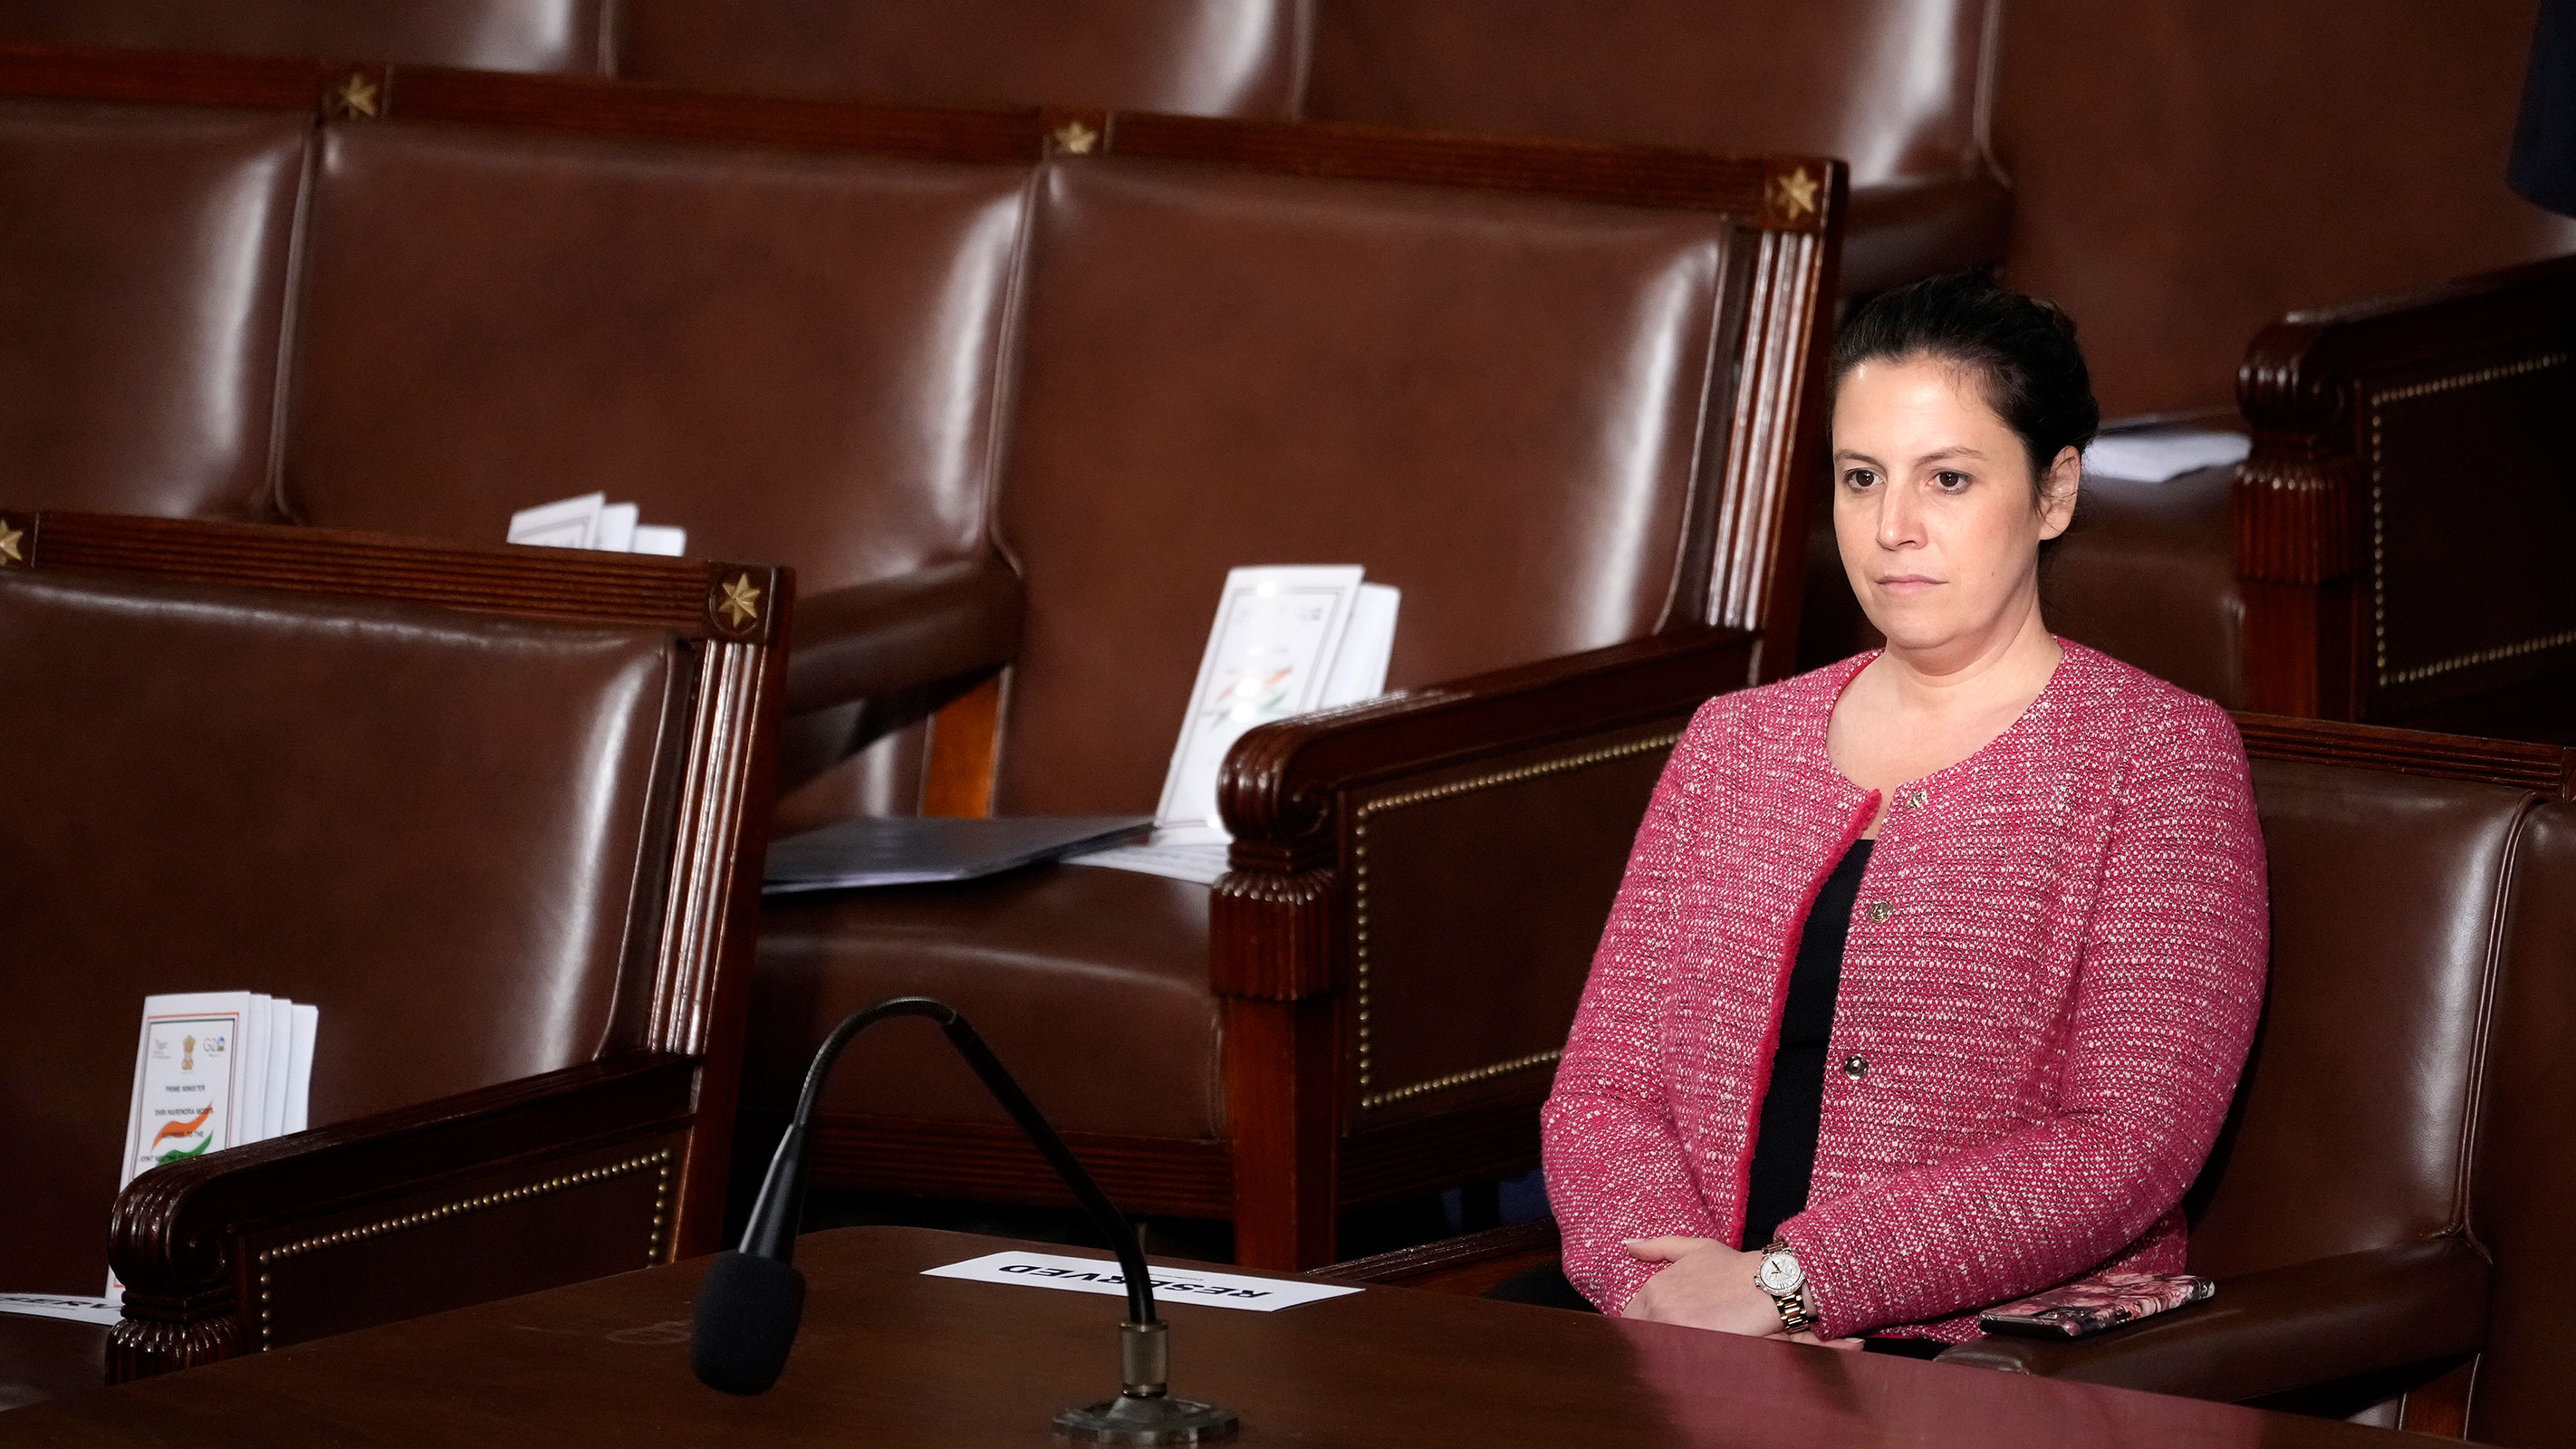 Rep. Elise Stefanik waits for an address by Indian Prime Minister Narendra Modi during a joint meeting of Congress at the U.S. Capitol on June 22, 2023 in Washington, DC. 